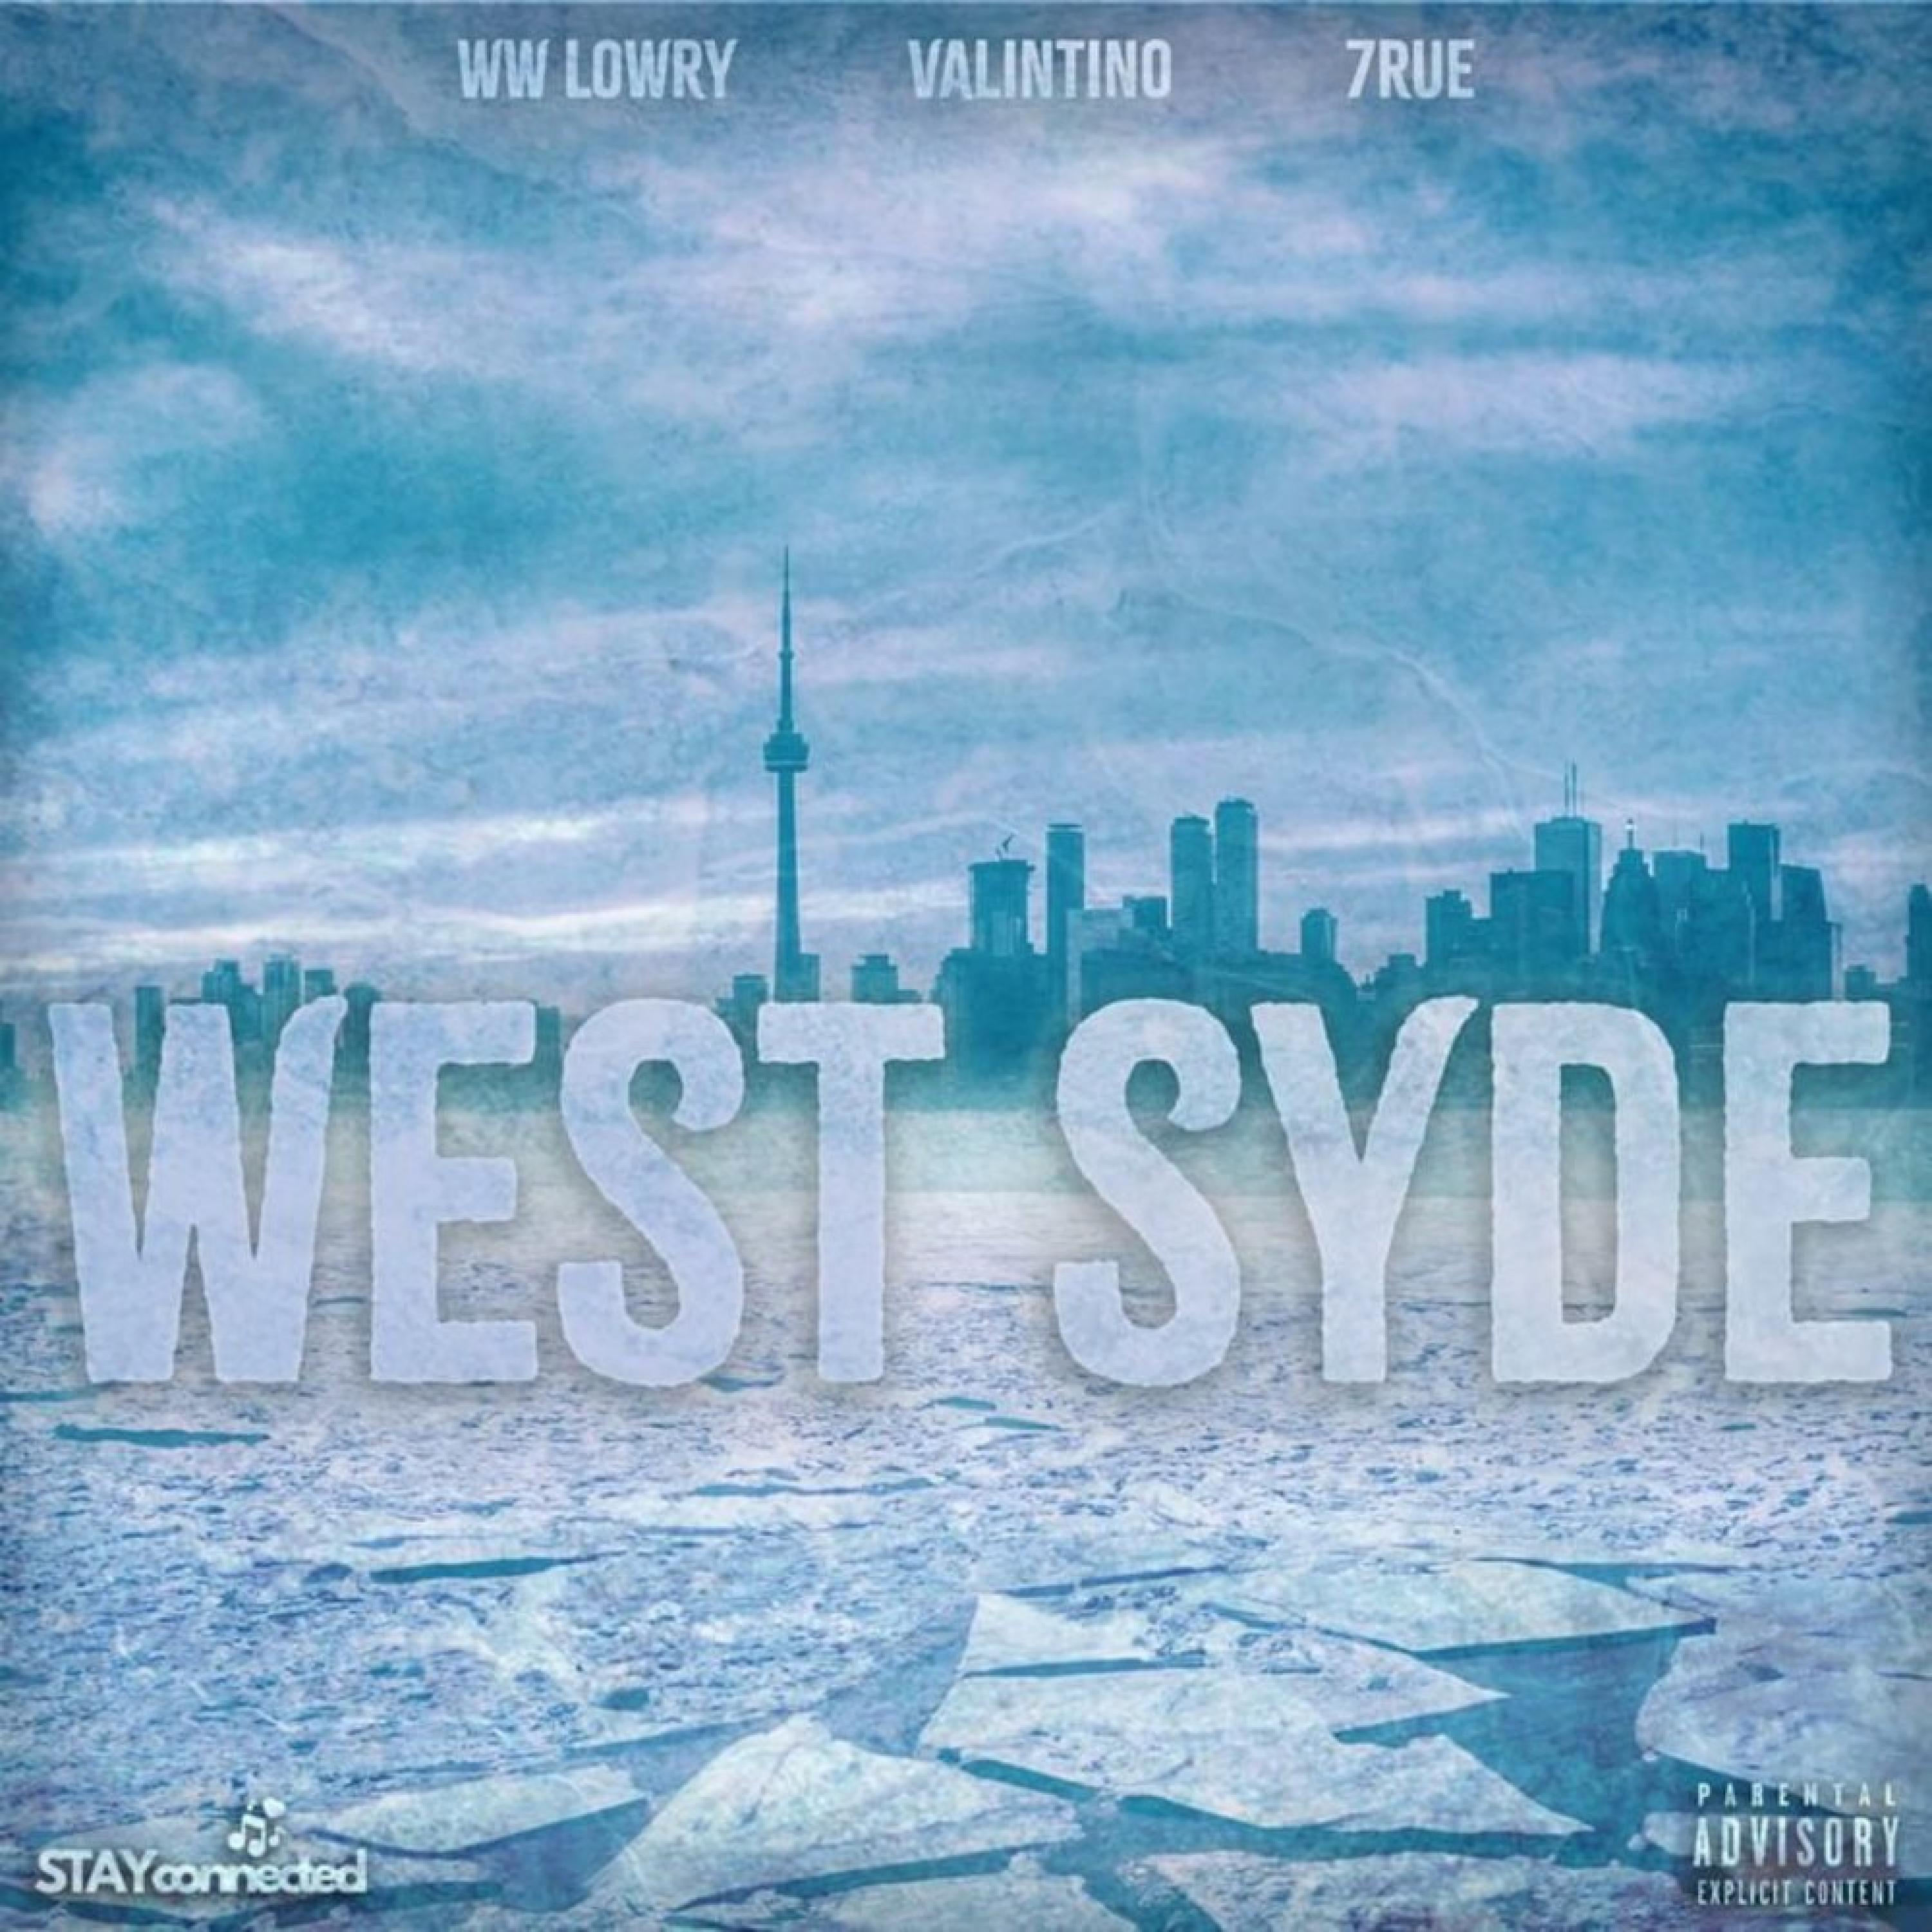 Valintino - West Syde (feat. WW Lowry & 7Rue)